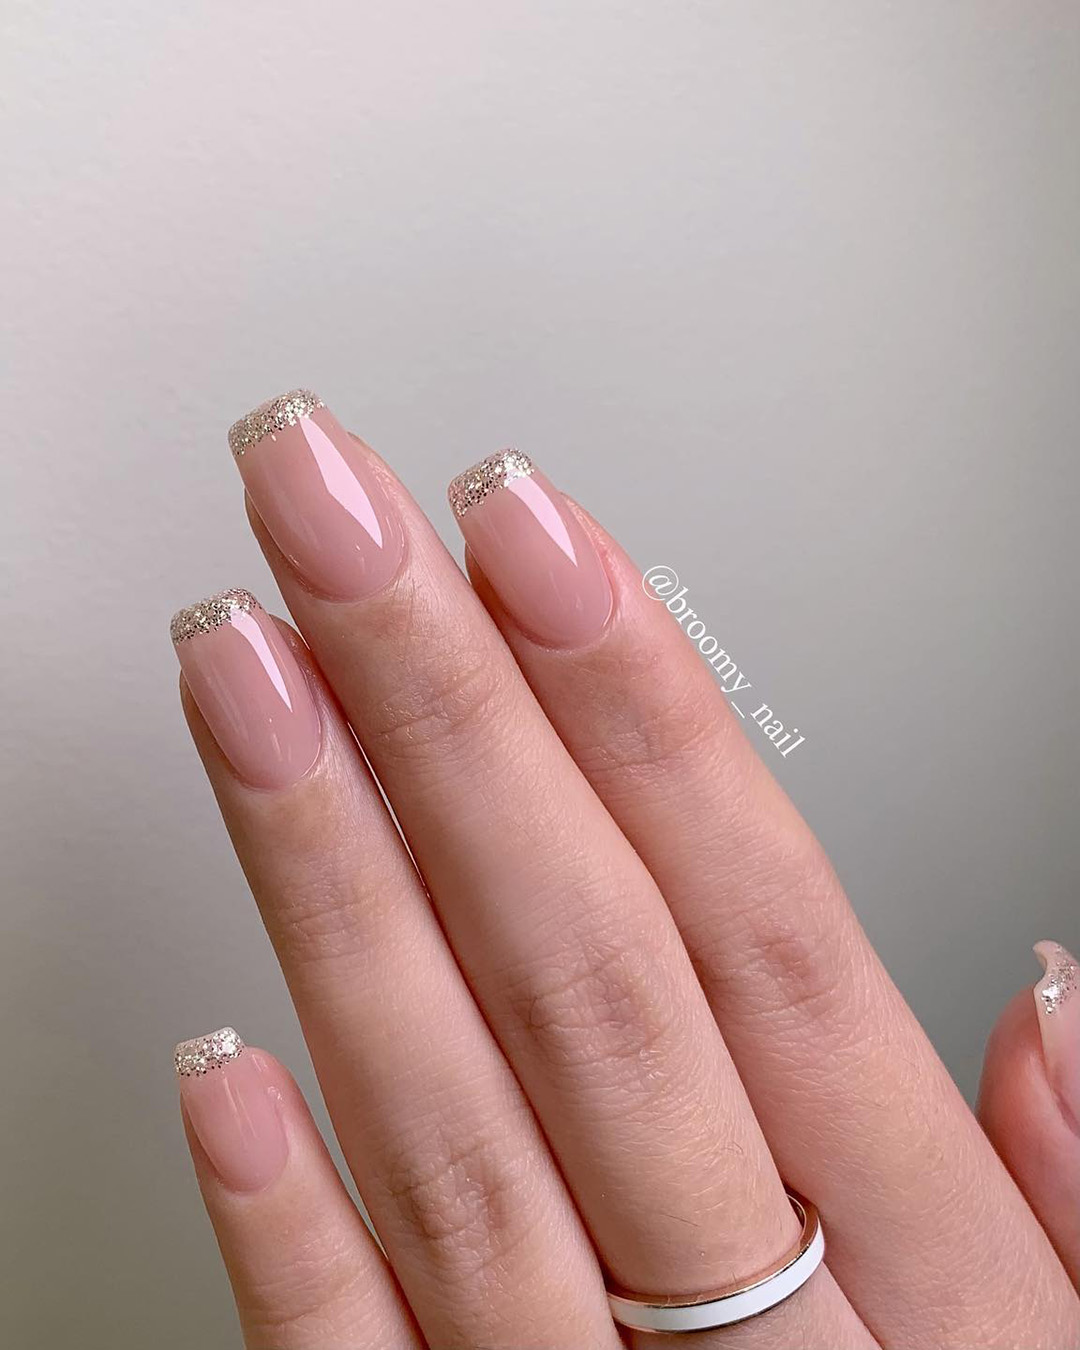 french wedding nails simple natural with glitter tips broomy_nail